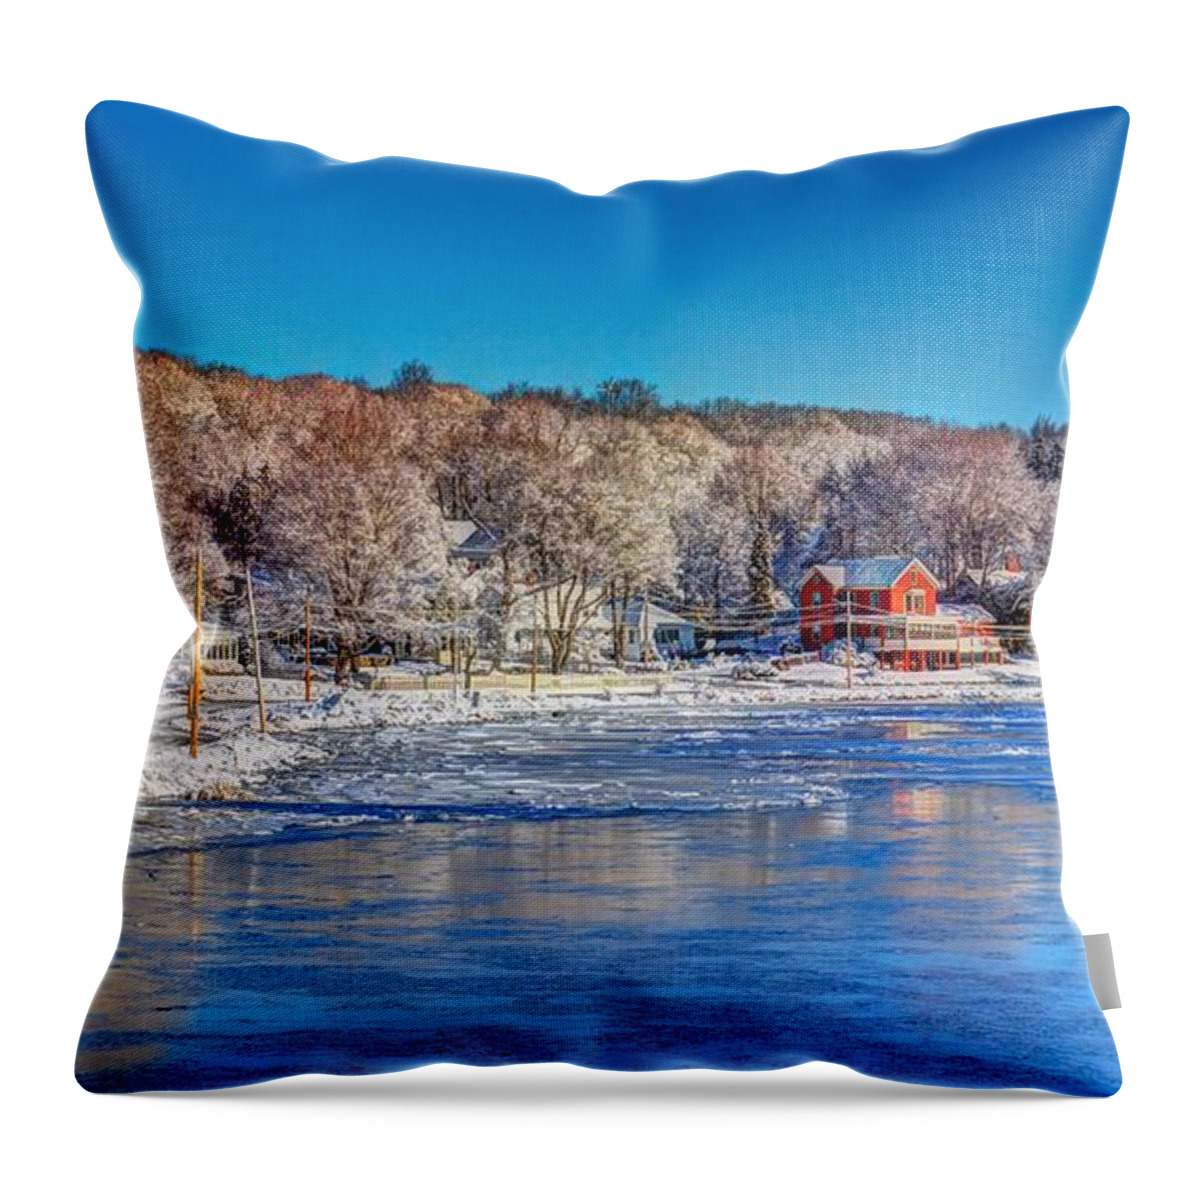 Ipswich Ma 10983 Throw Pillow featuring the photograph Snow in Ipswich by Adam Green